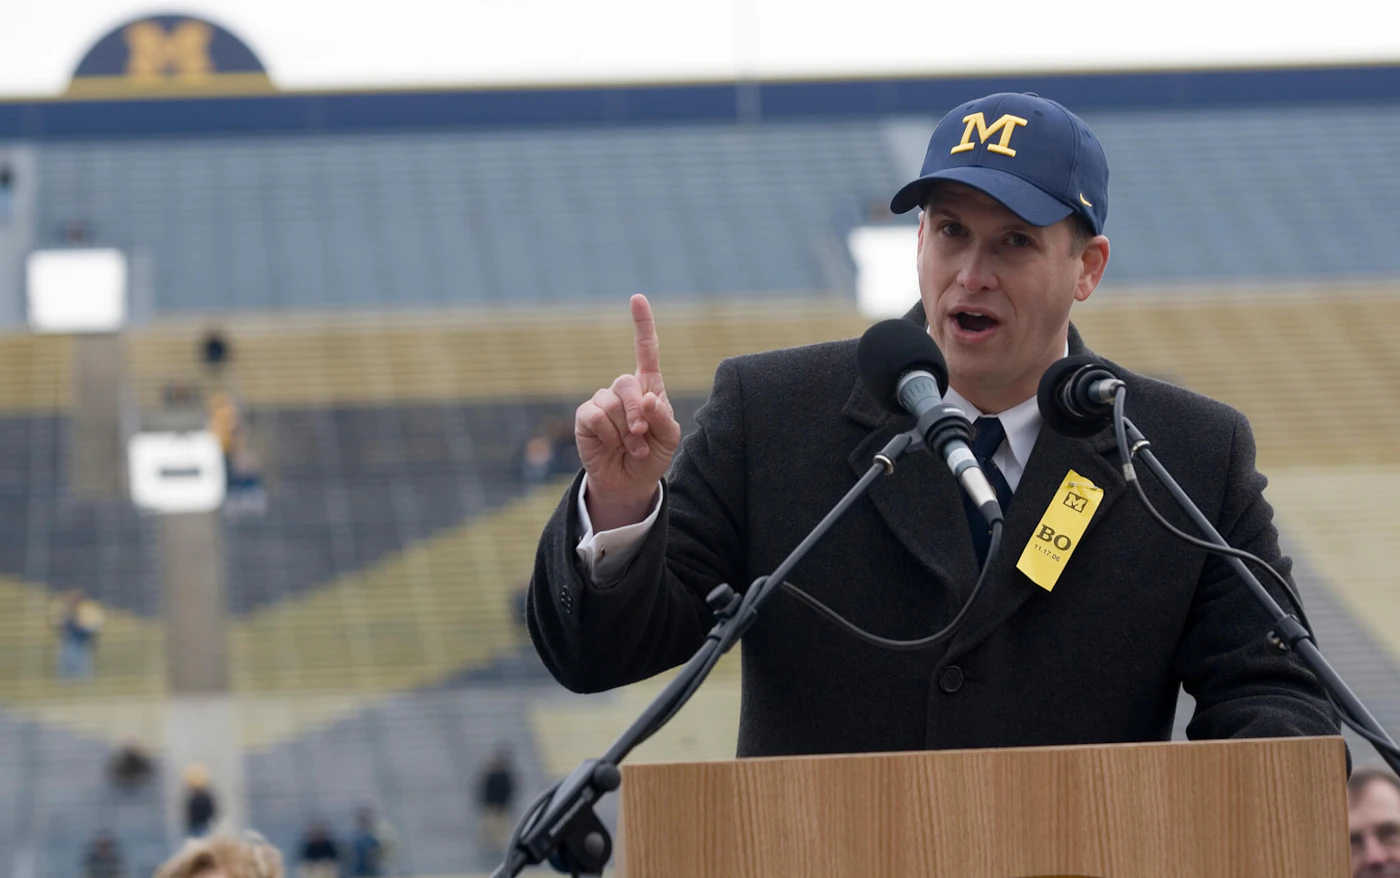 FILE - Glenn "Shemy" Schembechler III, son of former Michigan football coach Bo Schembechler, speaks at a public memorial service for his father, Nov. 21, 2006, at Michigan Stadium in Ann Arbor, Mich. Schembechler has resigned from his position with the Wolverines, with the school saying it was aware of his social media activity that may have caused “pain” in the community. (AP Photo/Tony Ding, file)